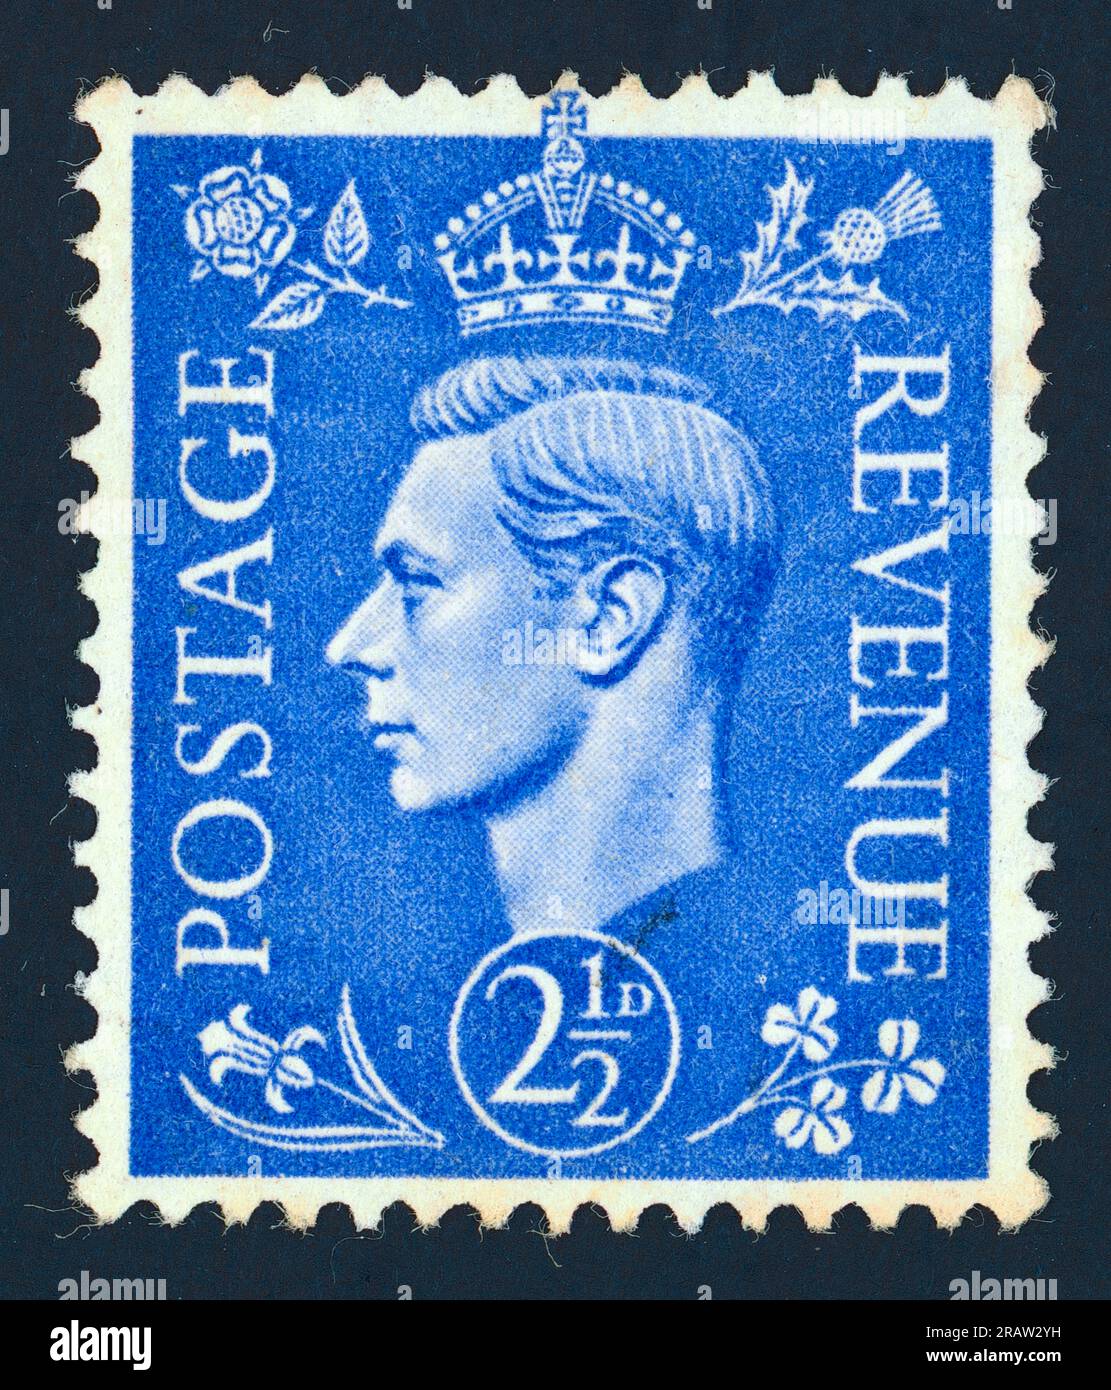 King George VI (ruled 1936–1952). Postage & Revenue stamp. United Kingdom, 1941. Face Value: 2½ D (pence). Designed by Edmund Dulac | Eric Gill. Stock Photo